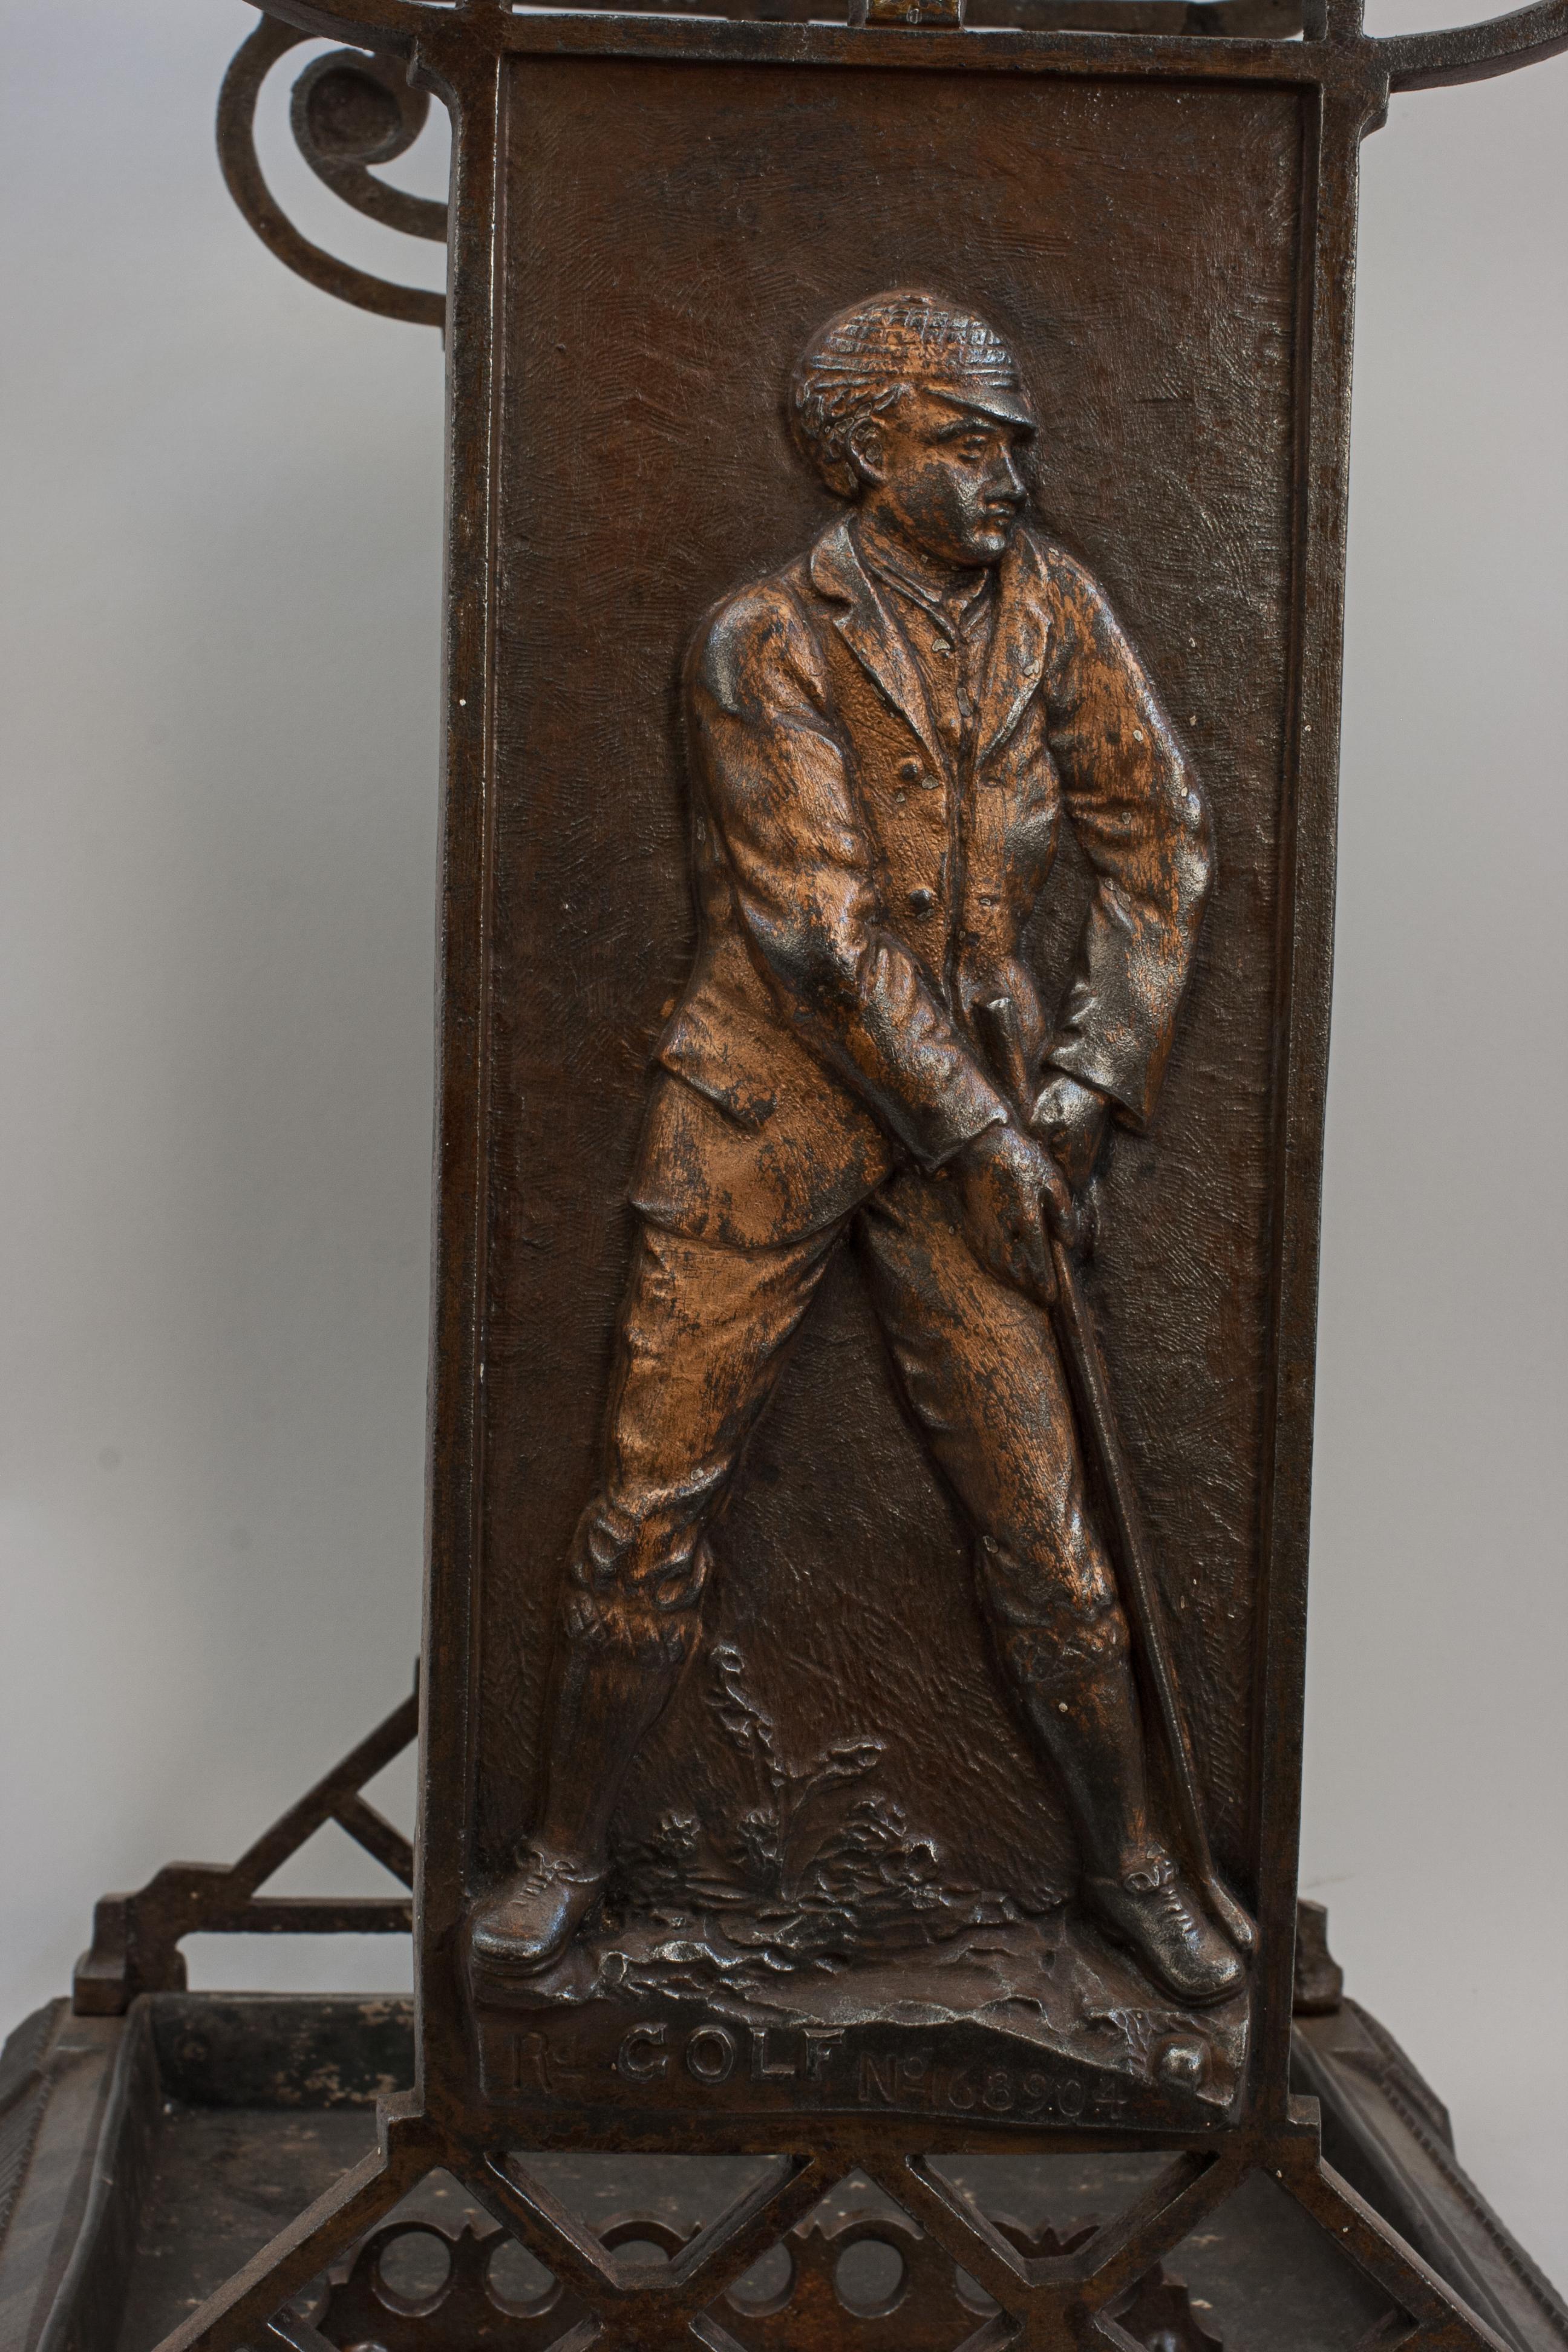 Cast Iron Umbrella Stand With Golf Figure For Sale 5